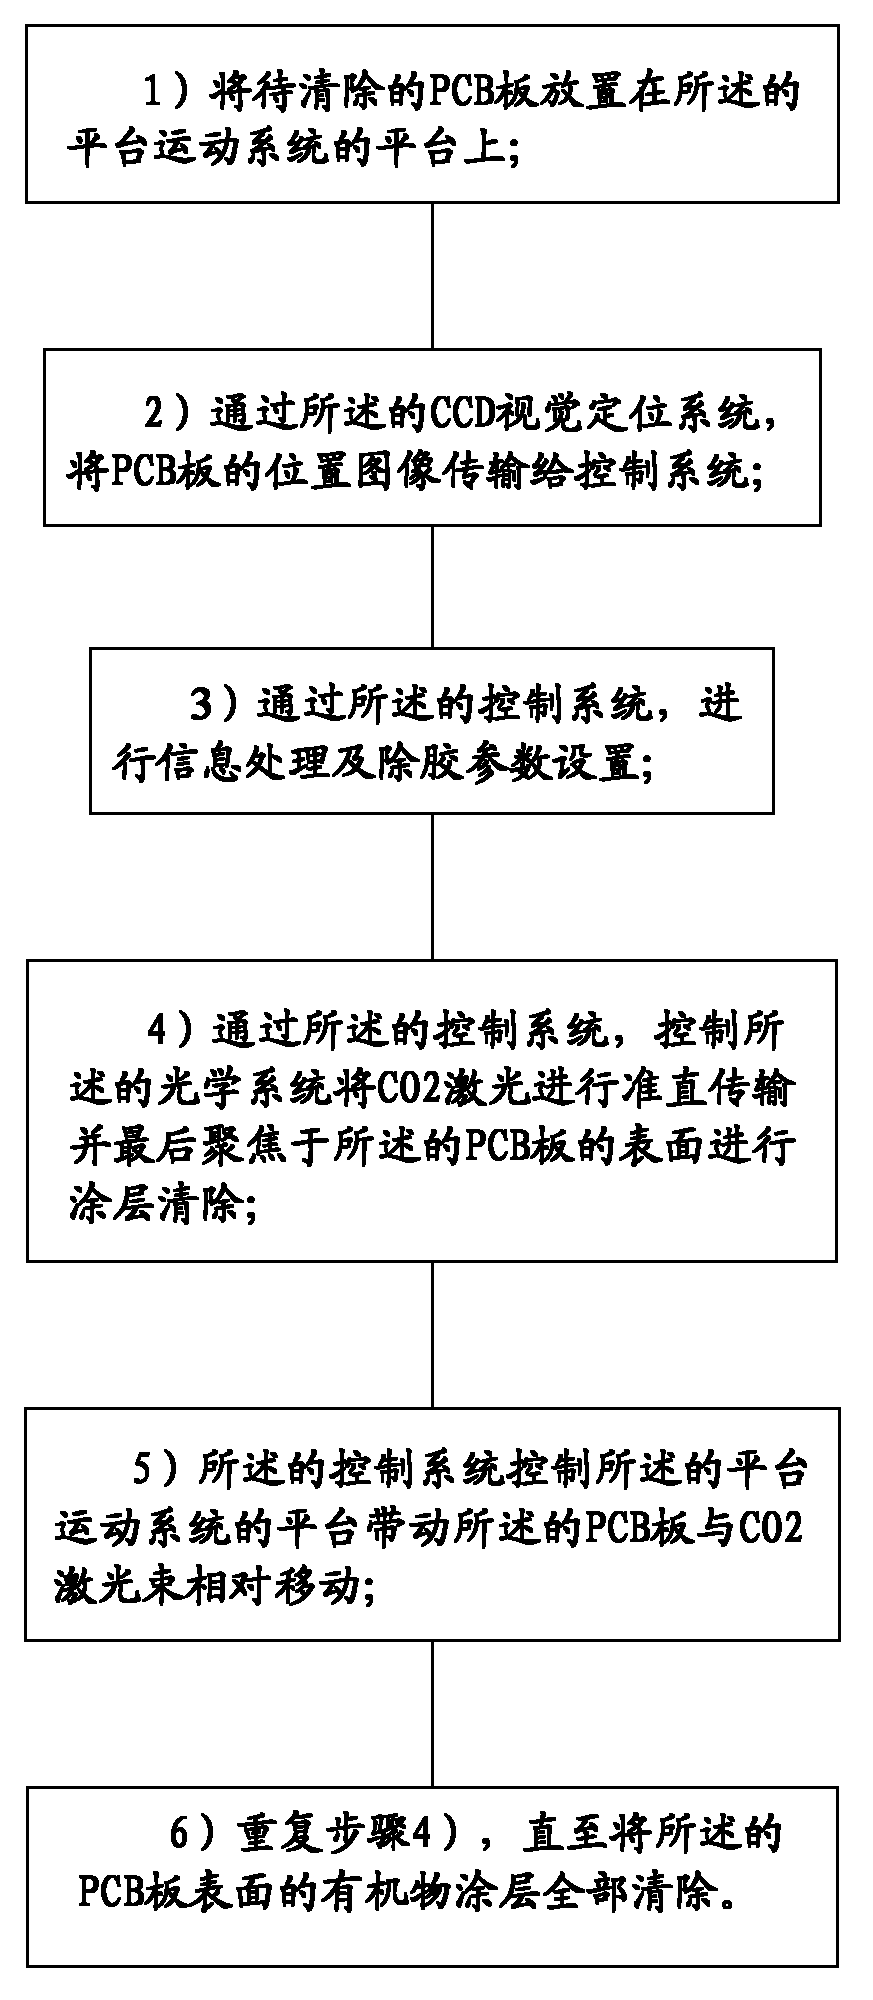 Device and method for degumming in SMT (surface mounting technology) industry